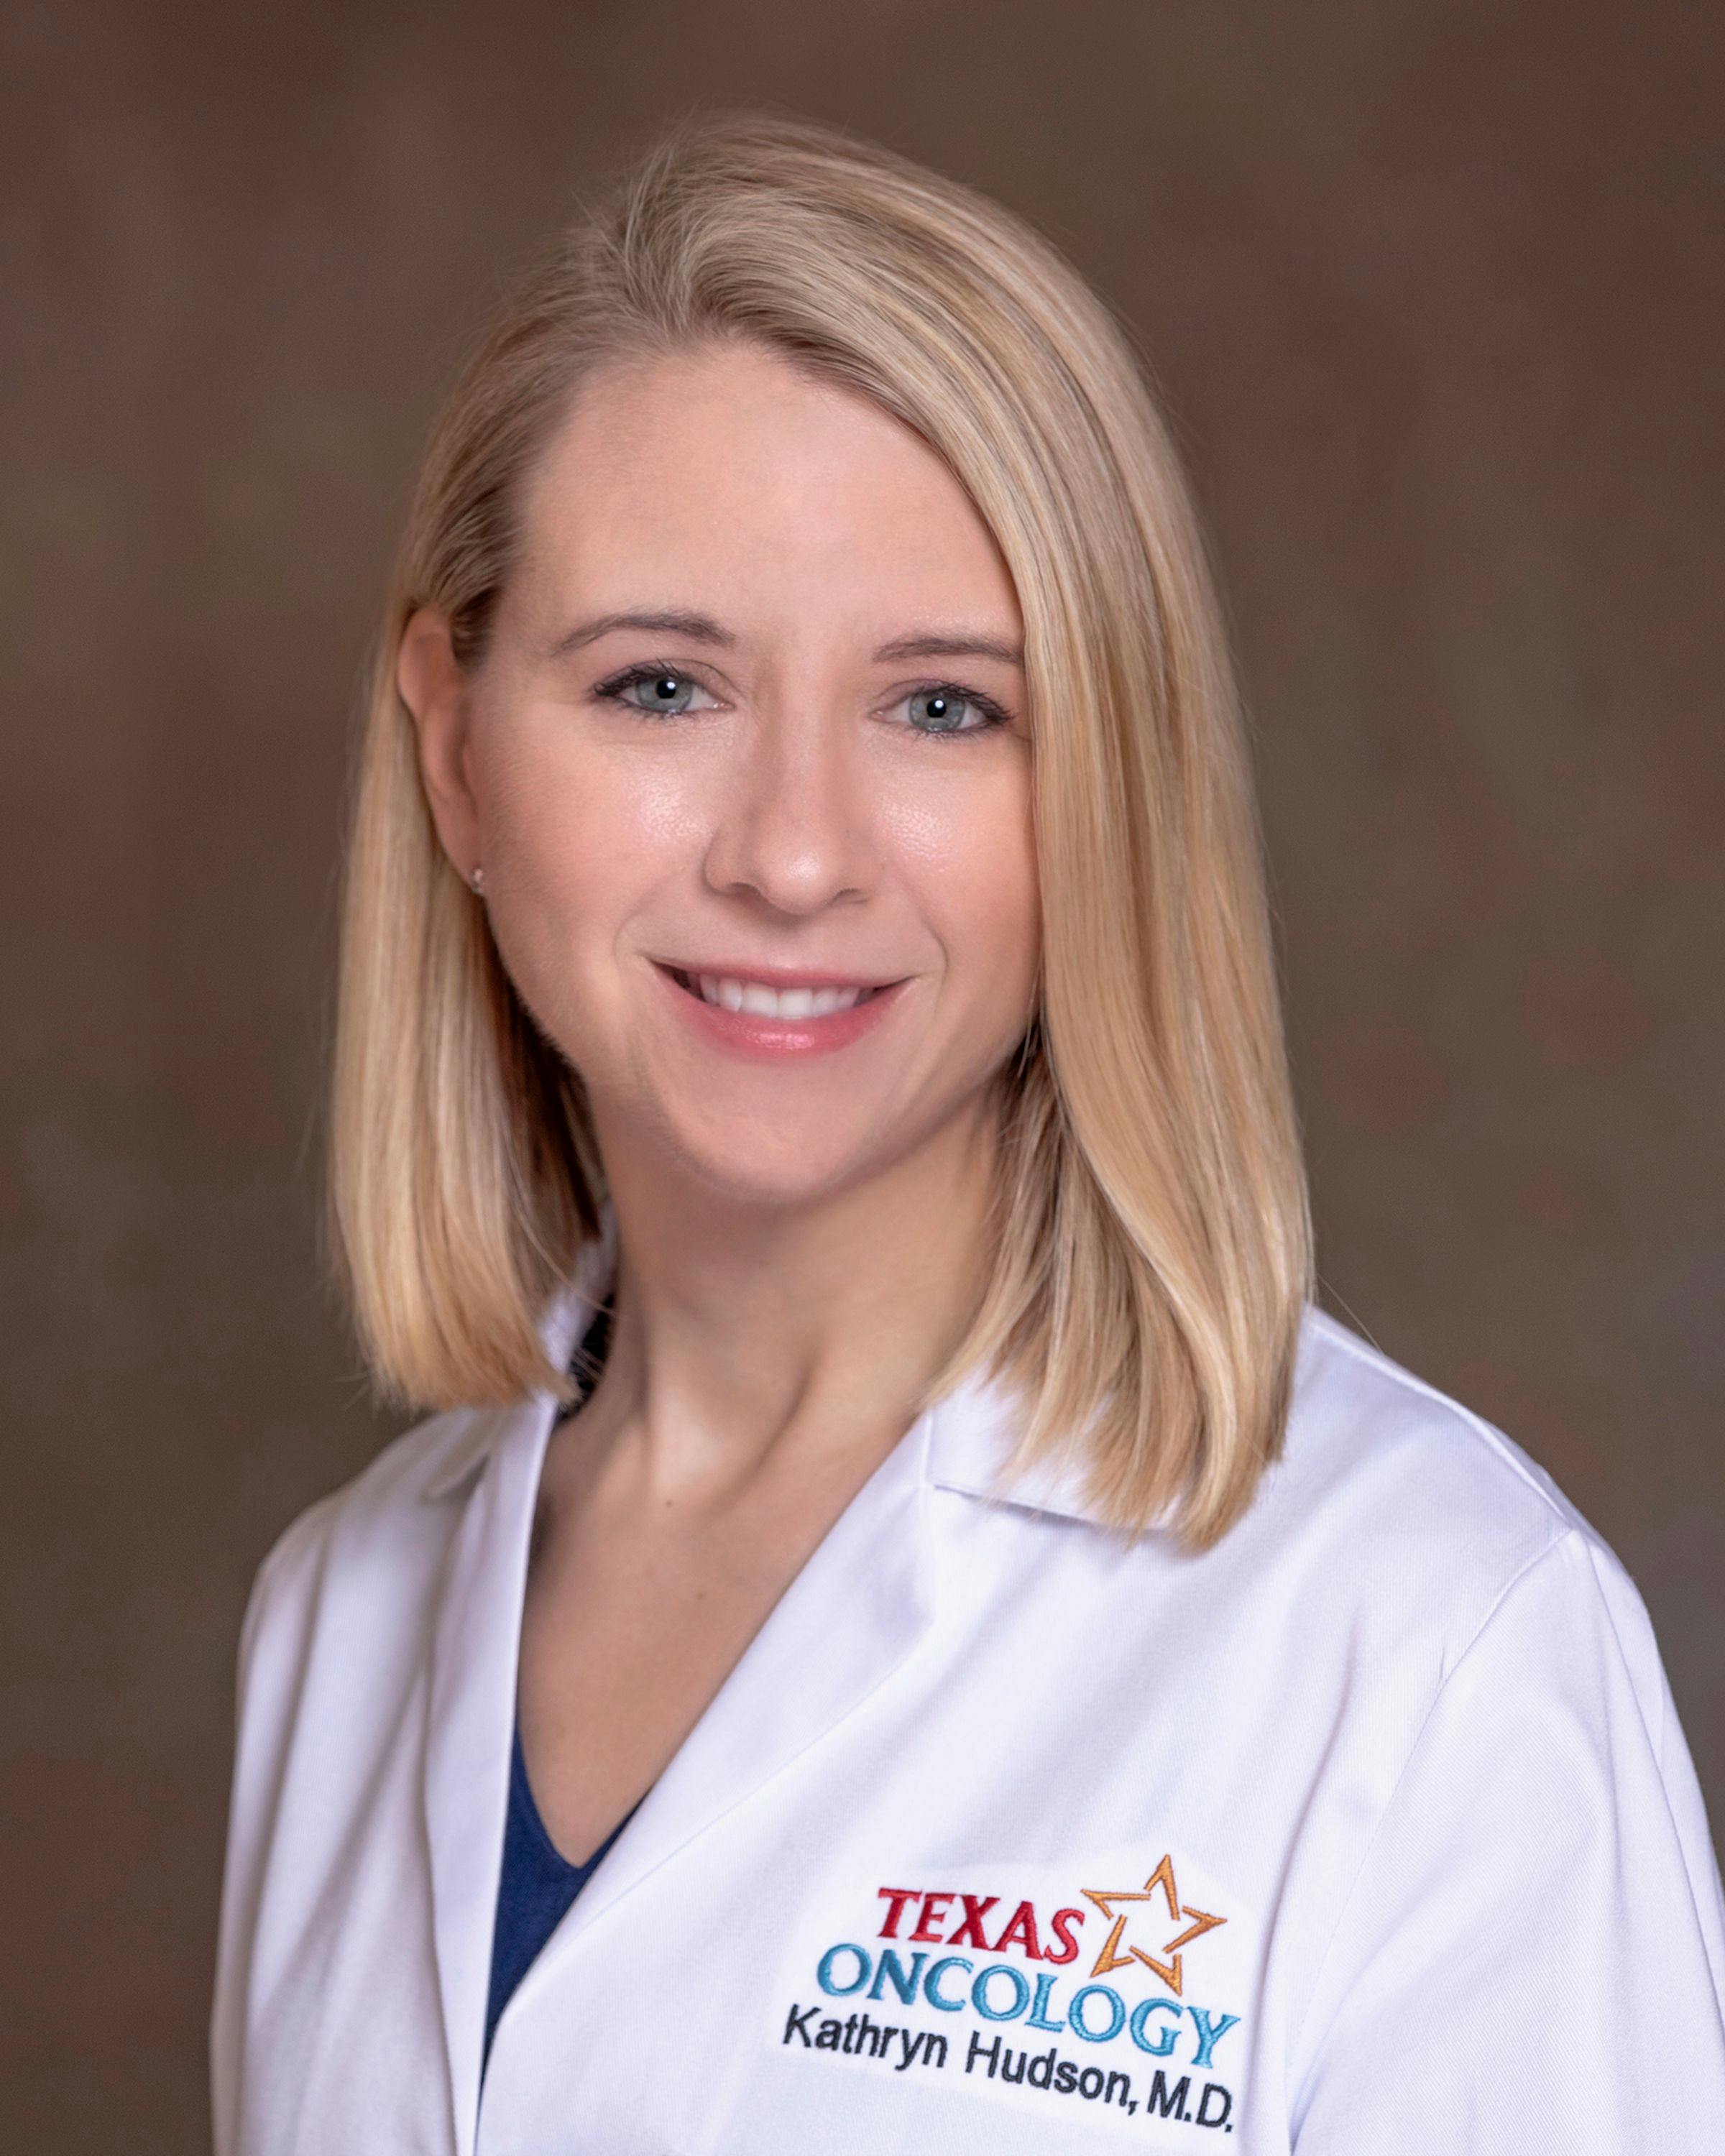 Kathryn E. Hudson, MD | Image Credit: Texas Oncology